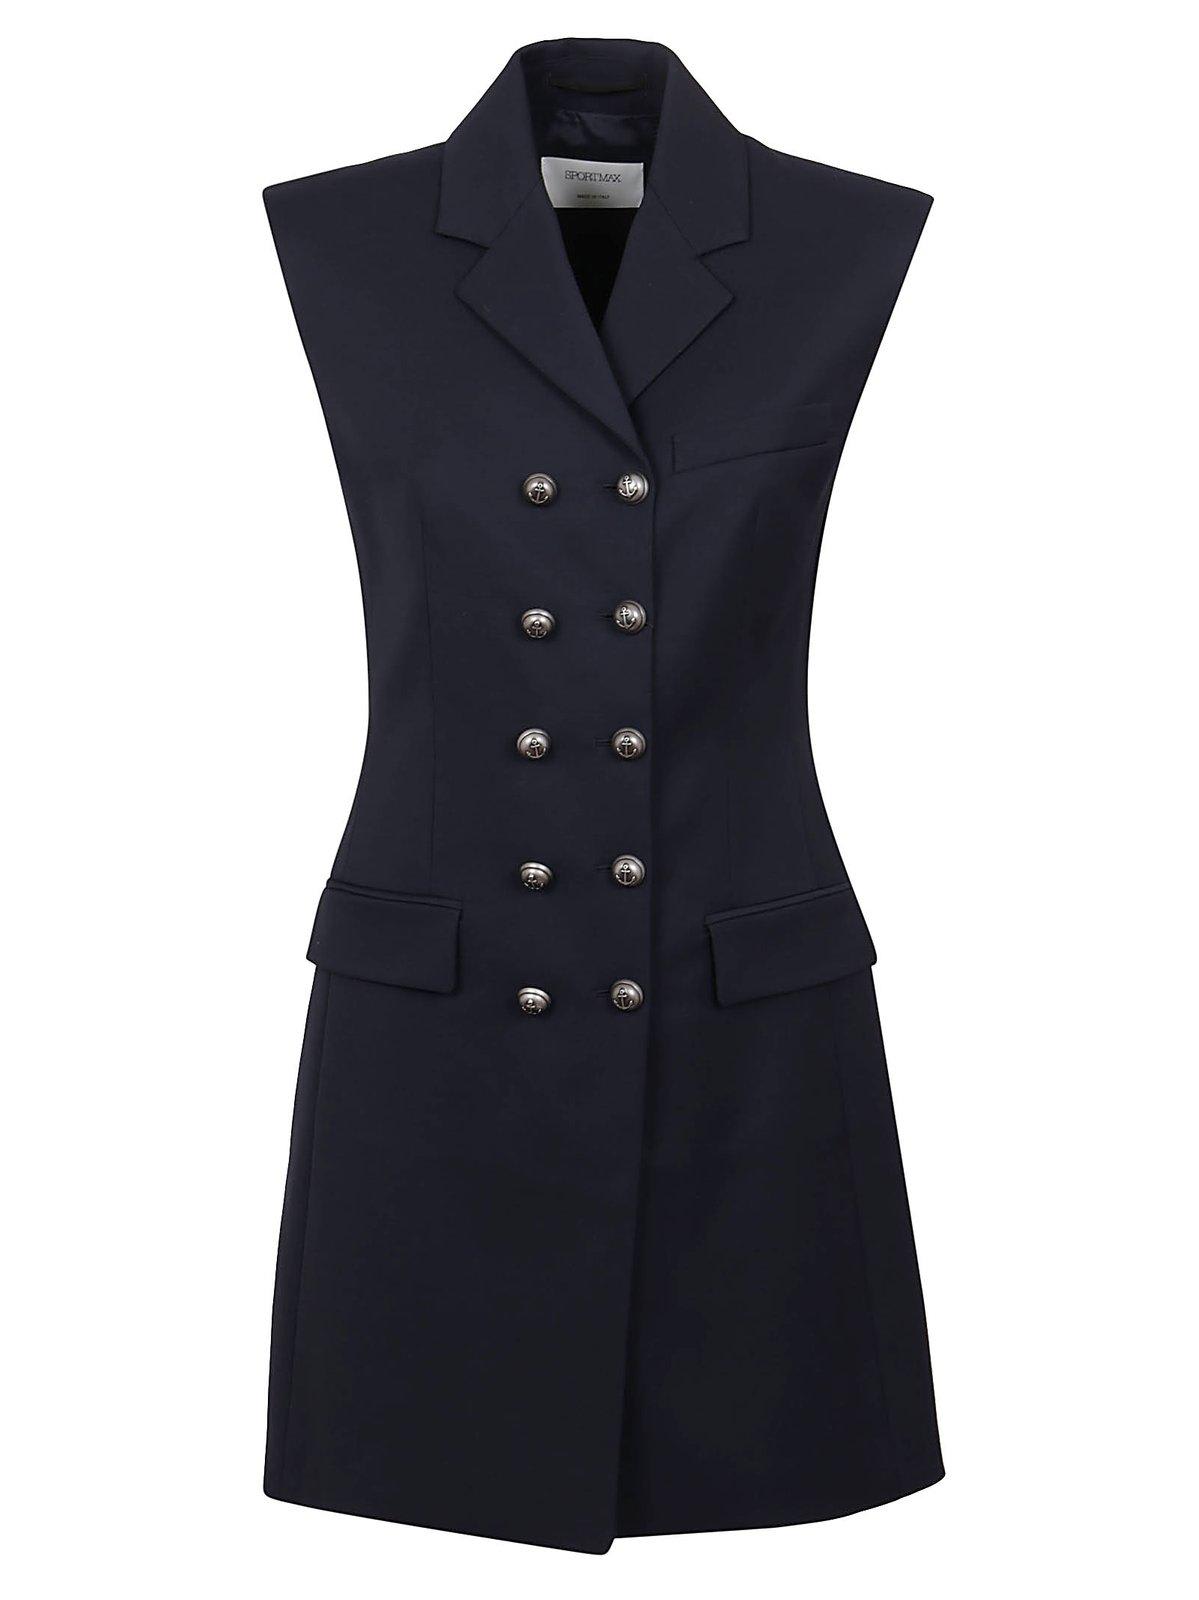 SportMax Double Breasted Sleeveless Gilet